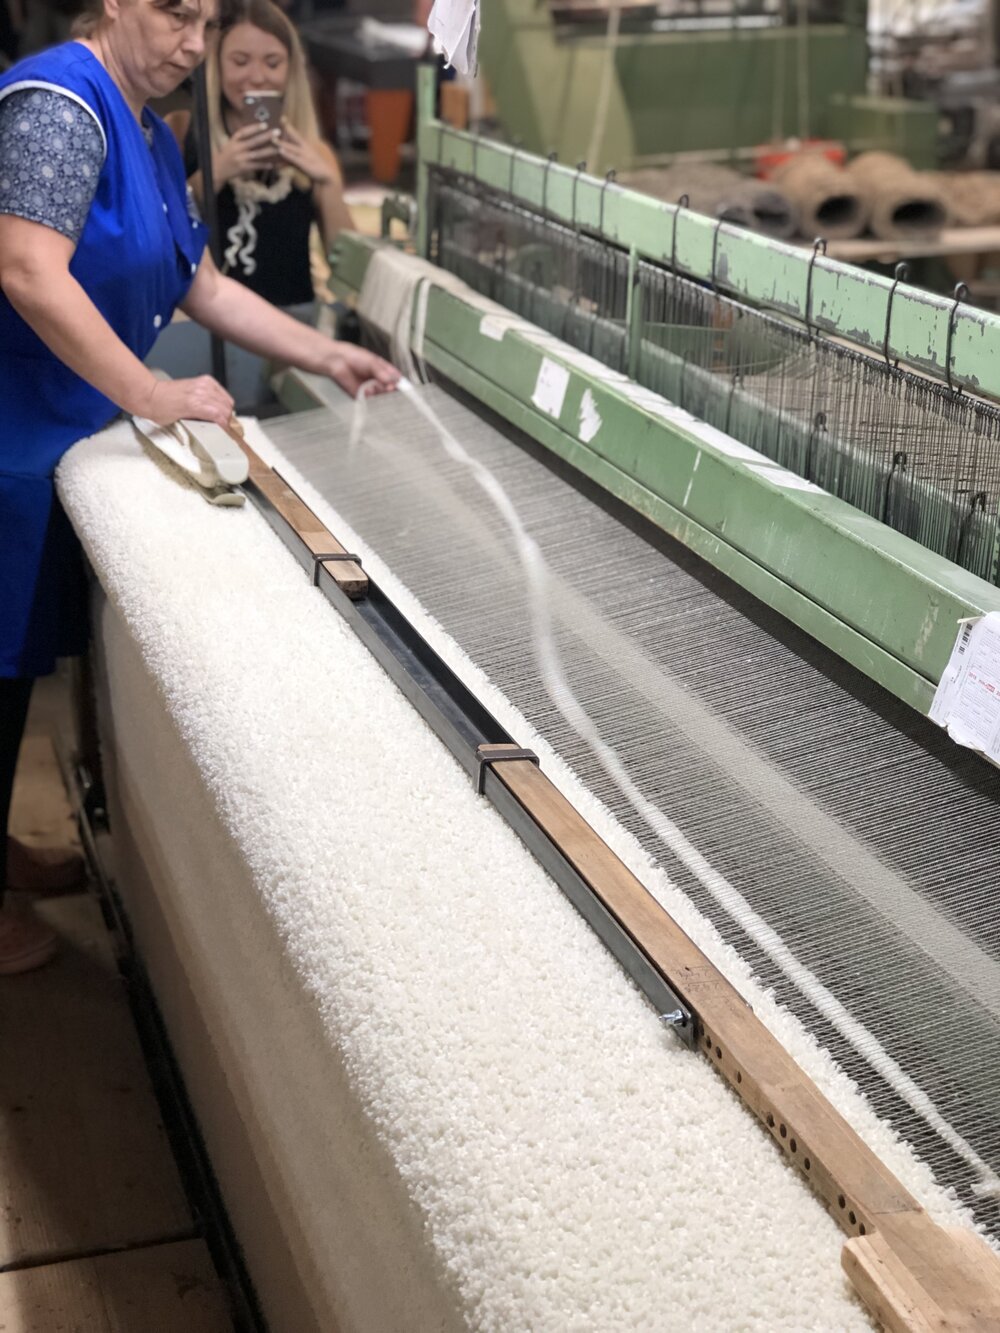 On the loom with a weaver